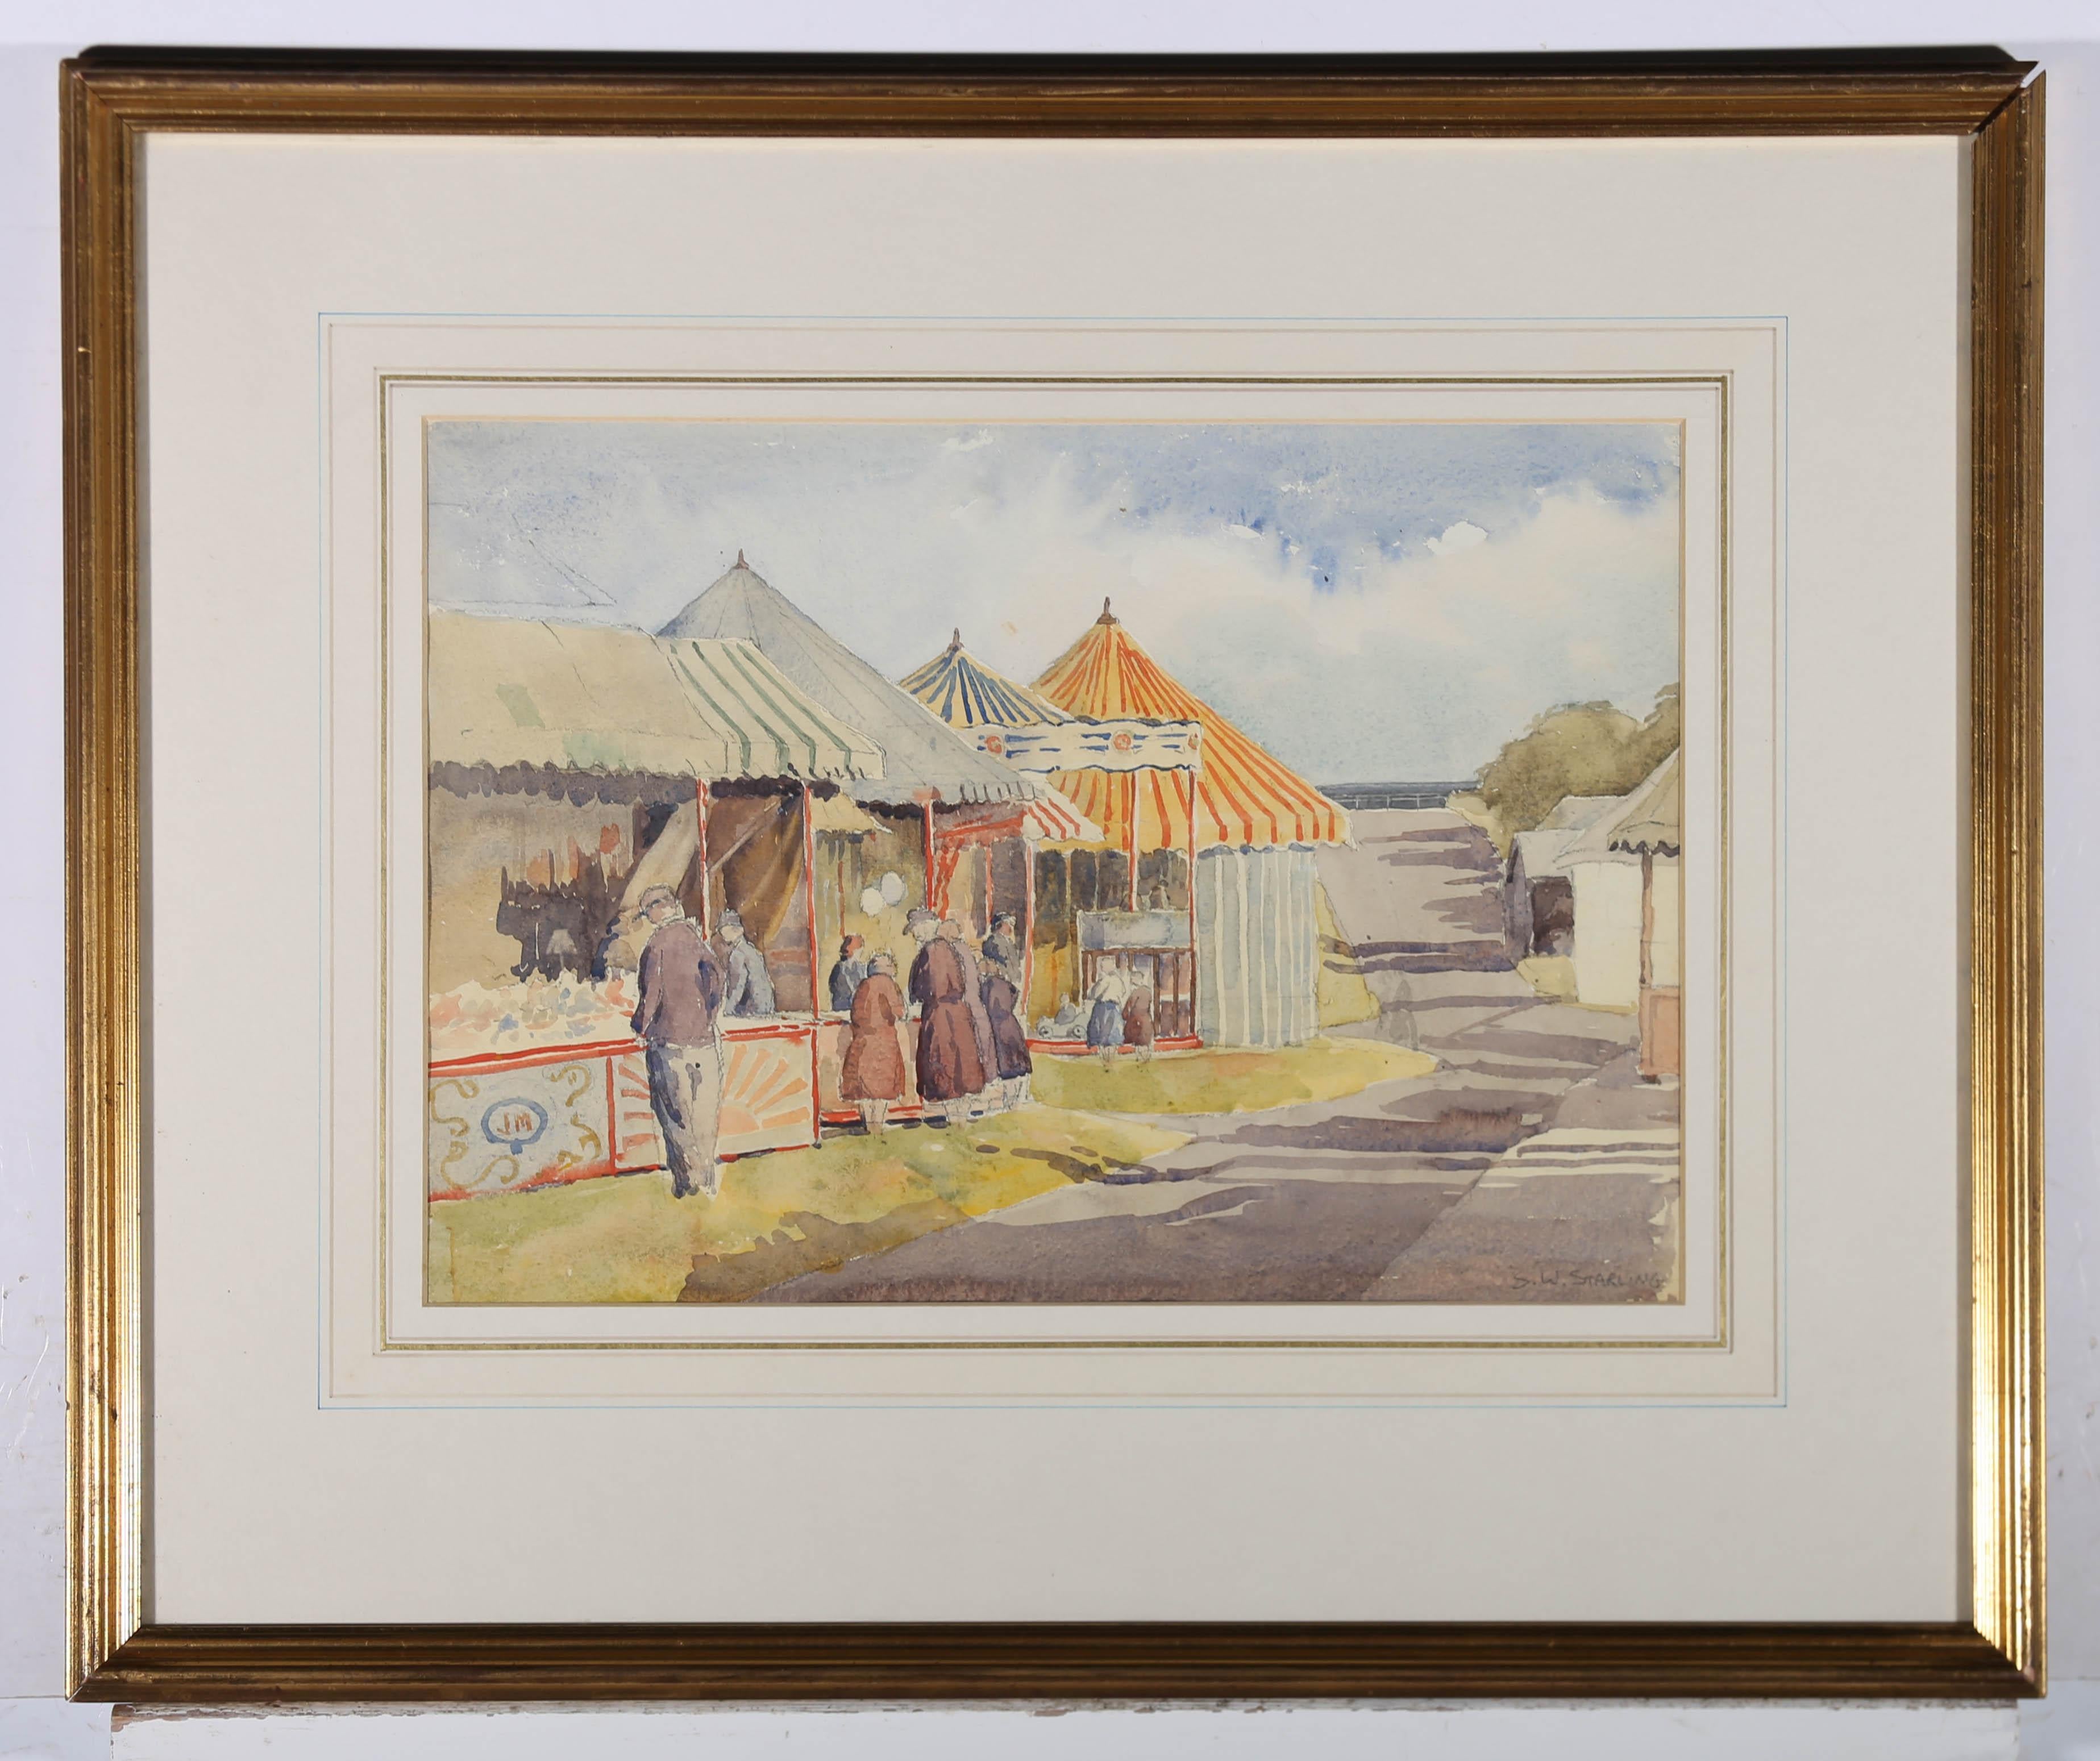 Sydney W. Starling (1889-1984) - 1930 Watercolour, The Fair at Worthing For Sale 1